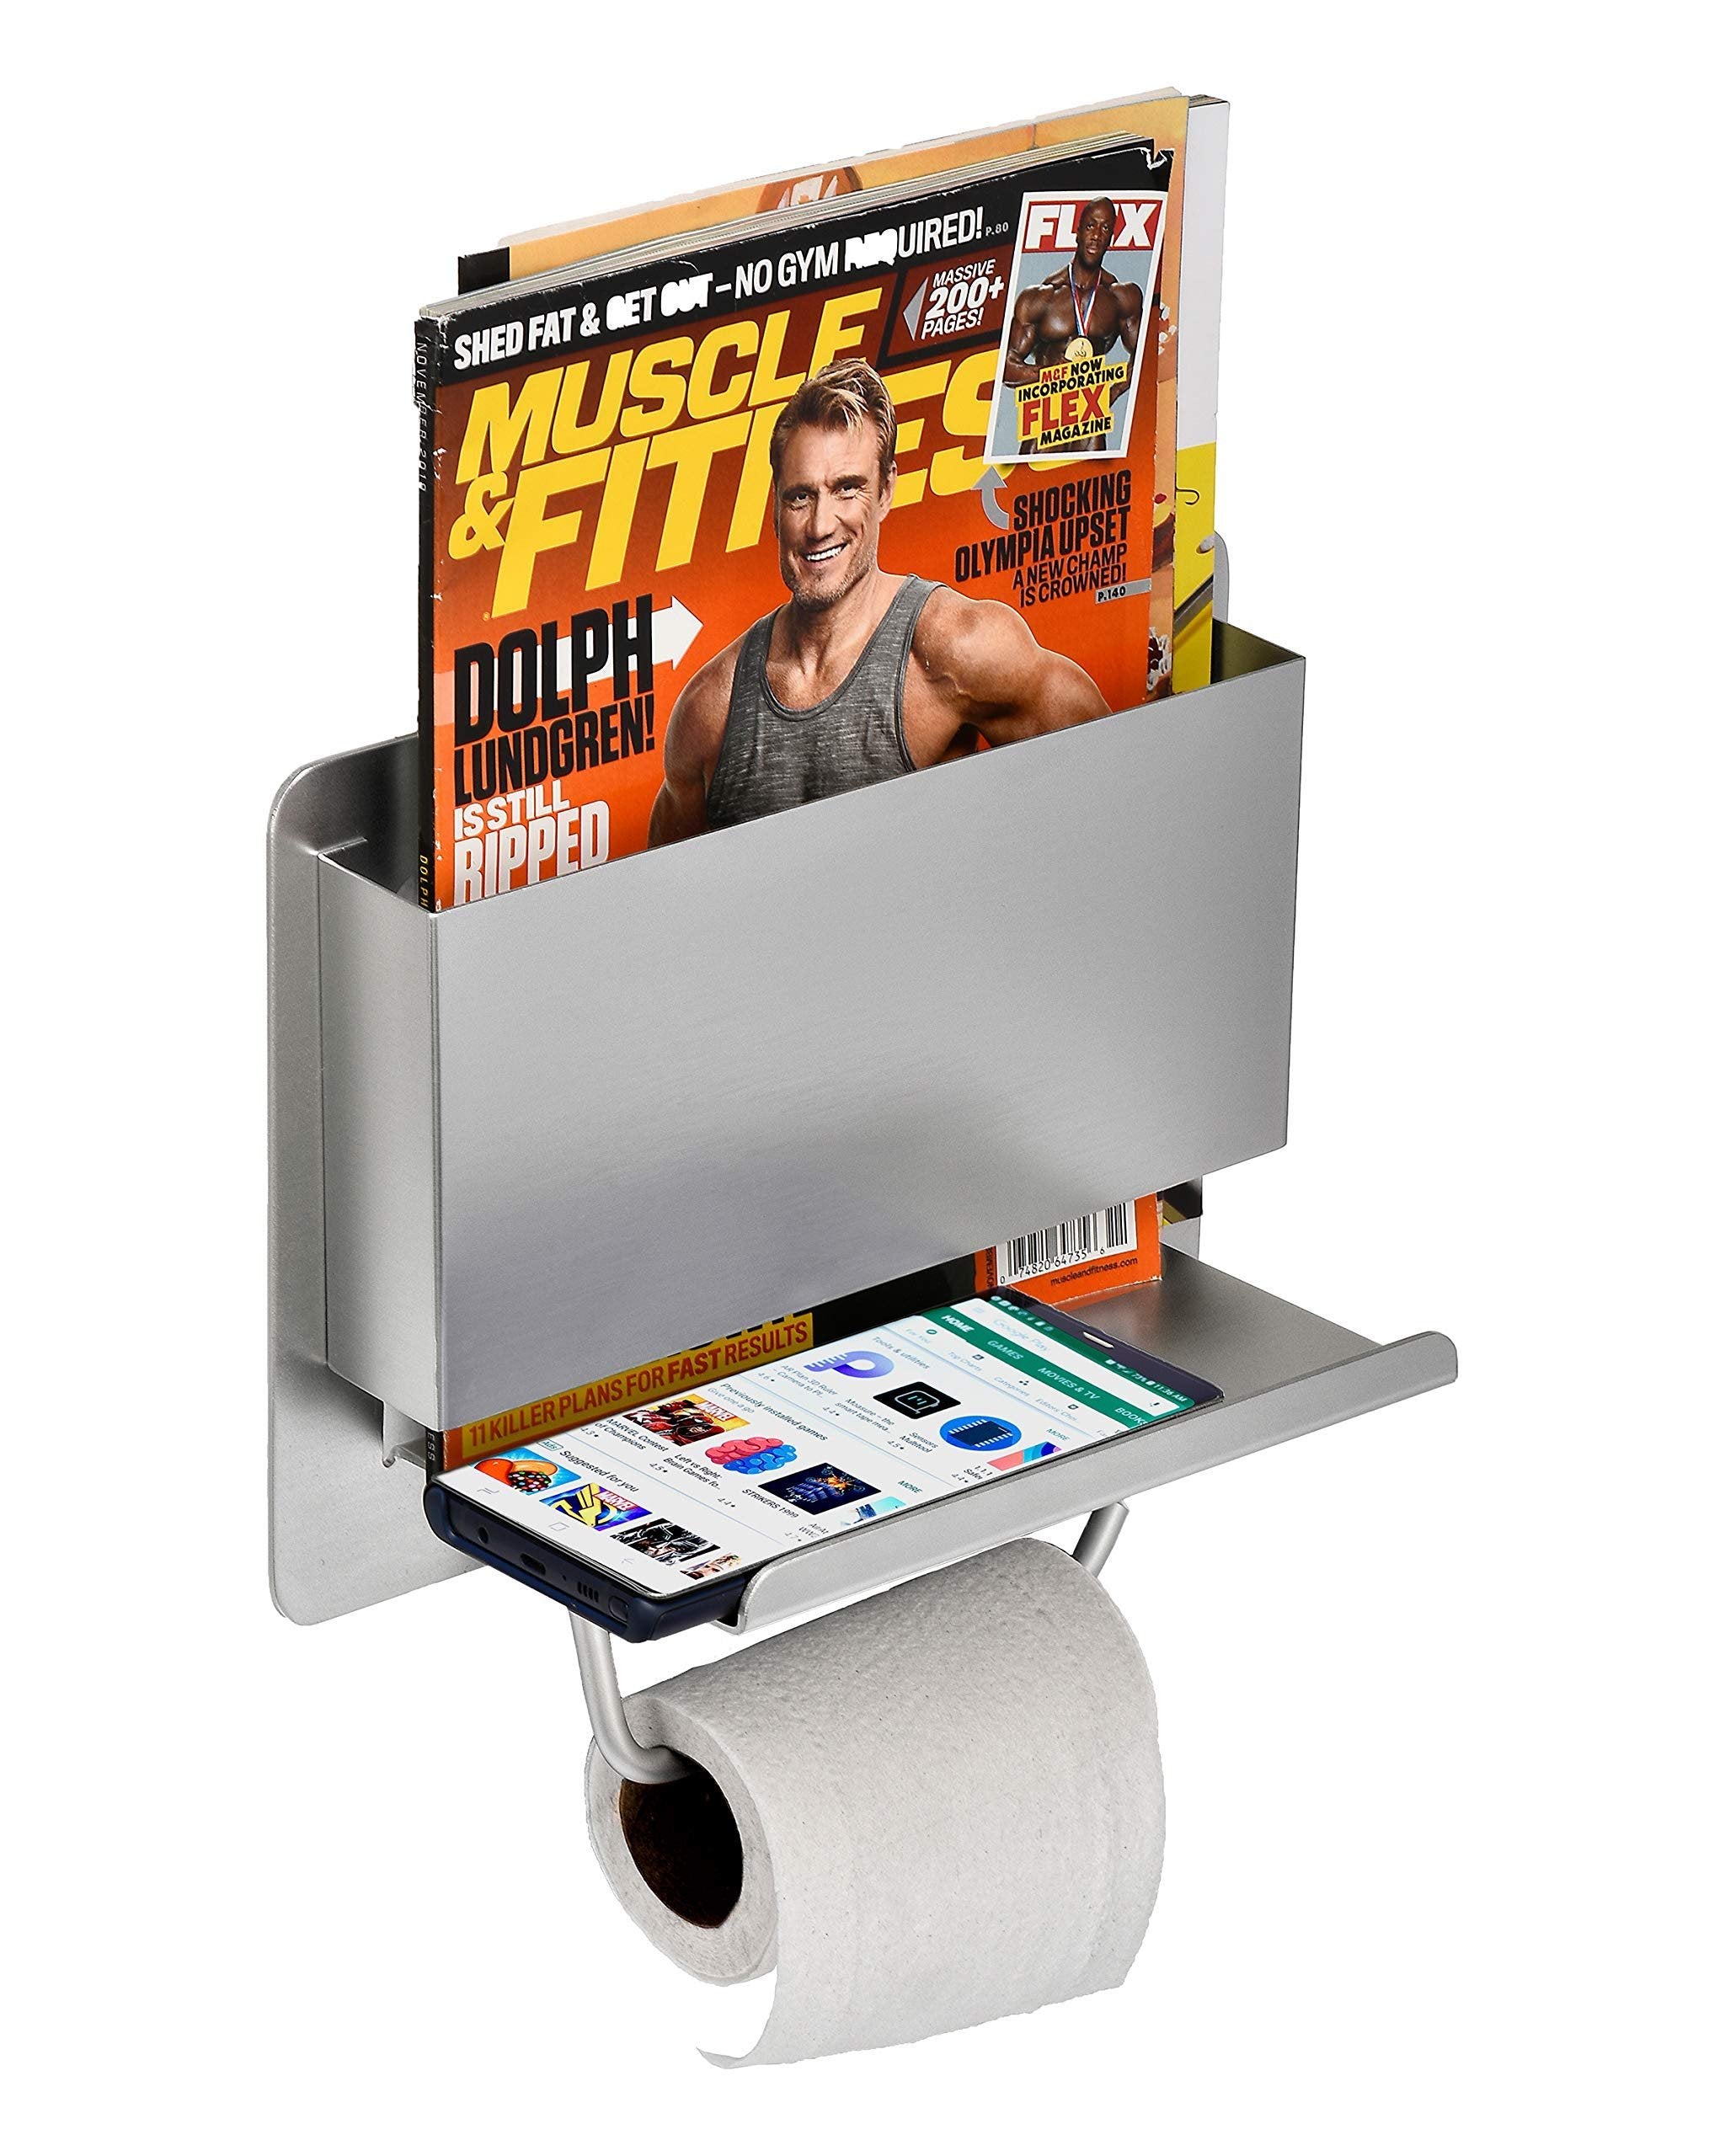 AdirHome Stainless Steel Toilet Paper Holder with Shelf - Fits All Mobile Phones - Bathroom Rack & Magazine Organizer - Free Shipping